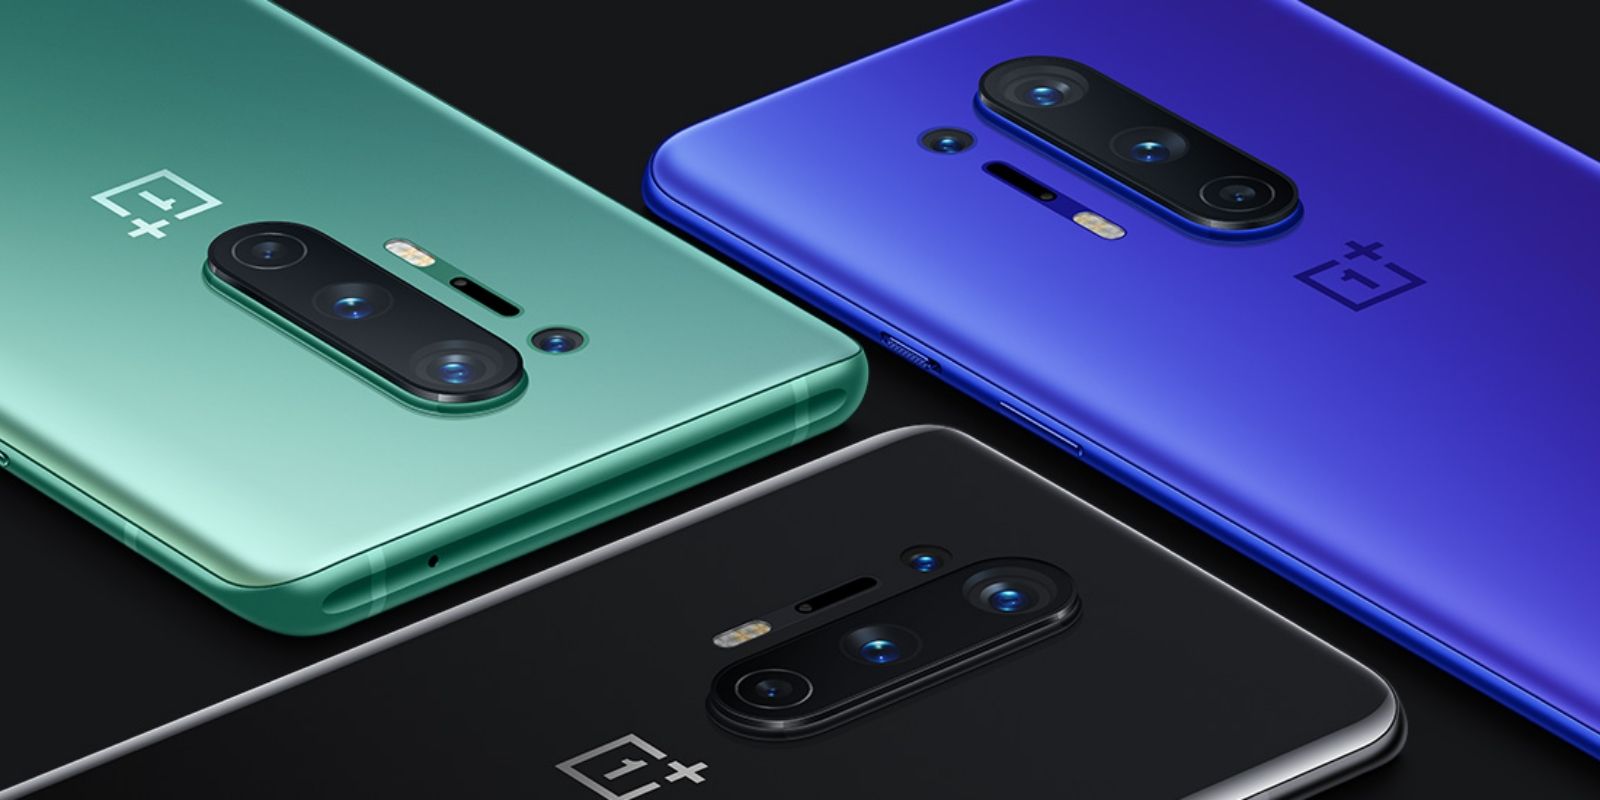 Oneplus Finally Launches Oneplus 8, And 8 Pro